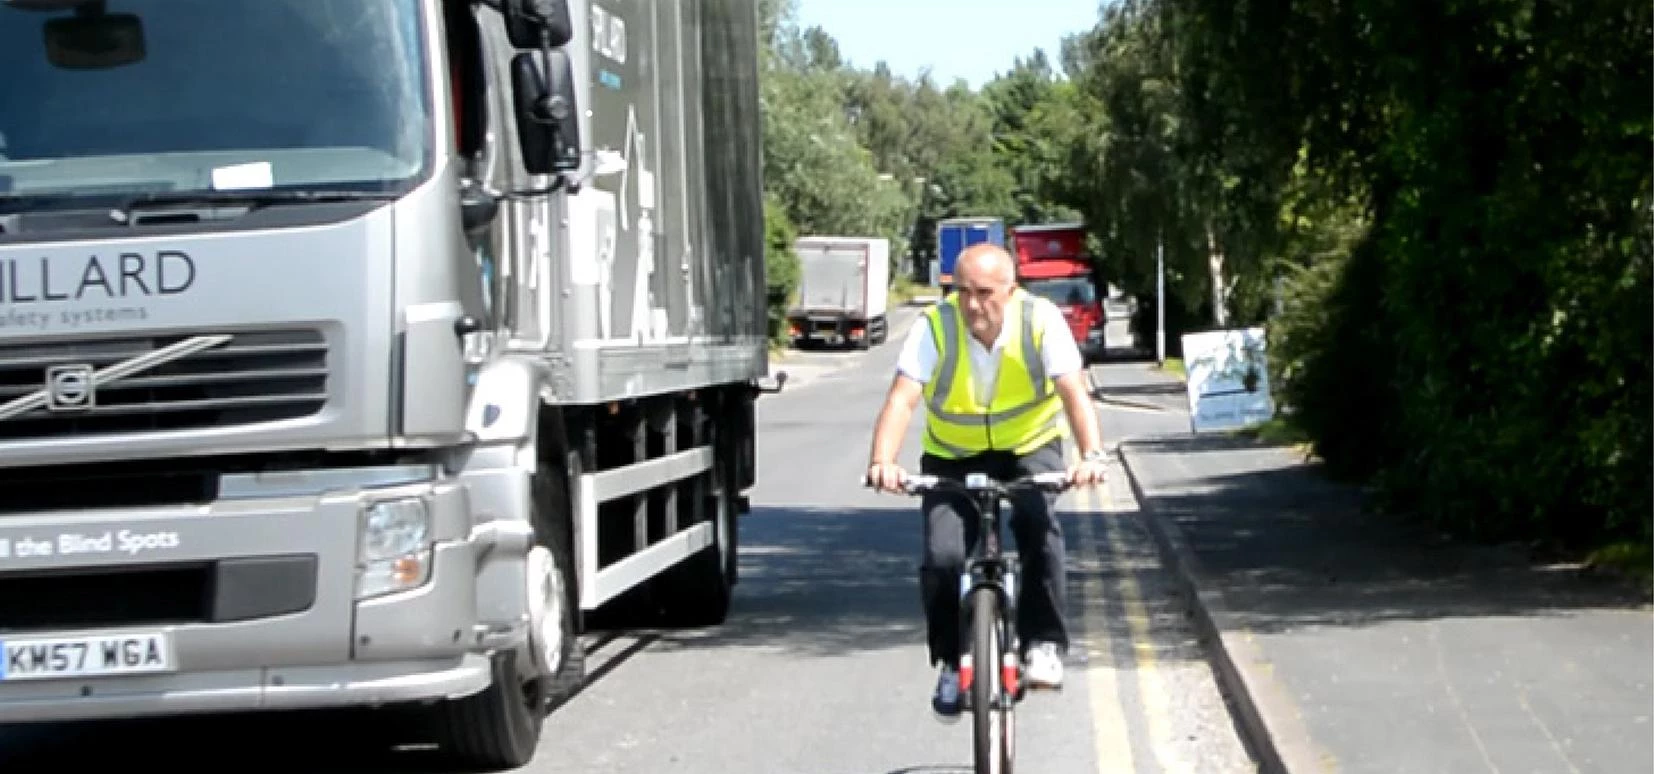 The new technology will ensure drivers have better visibility of cyclists 